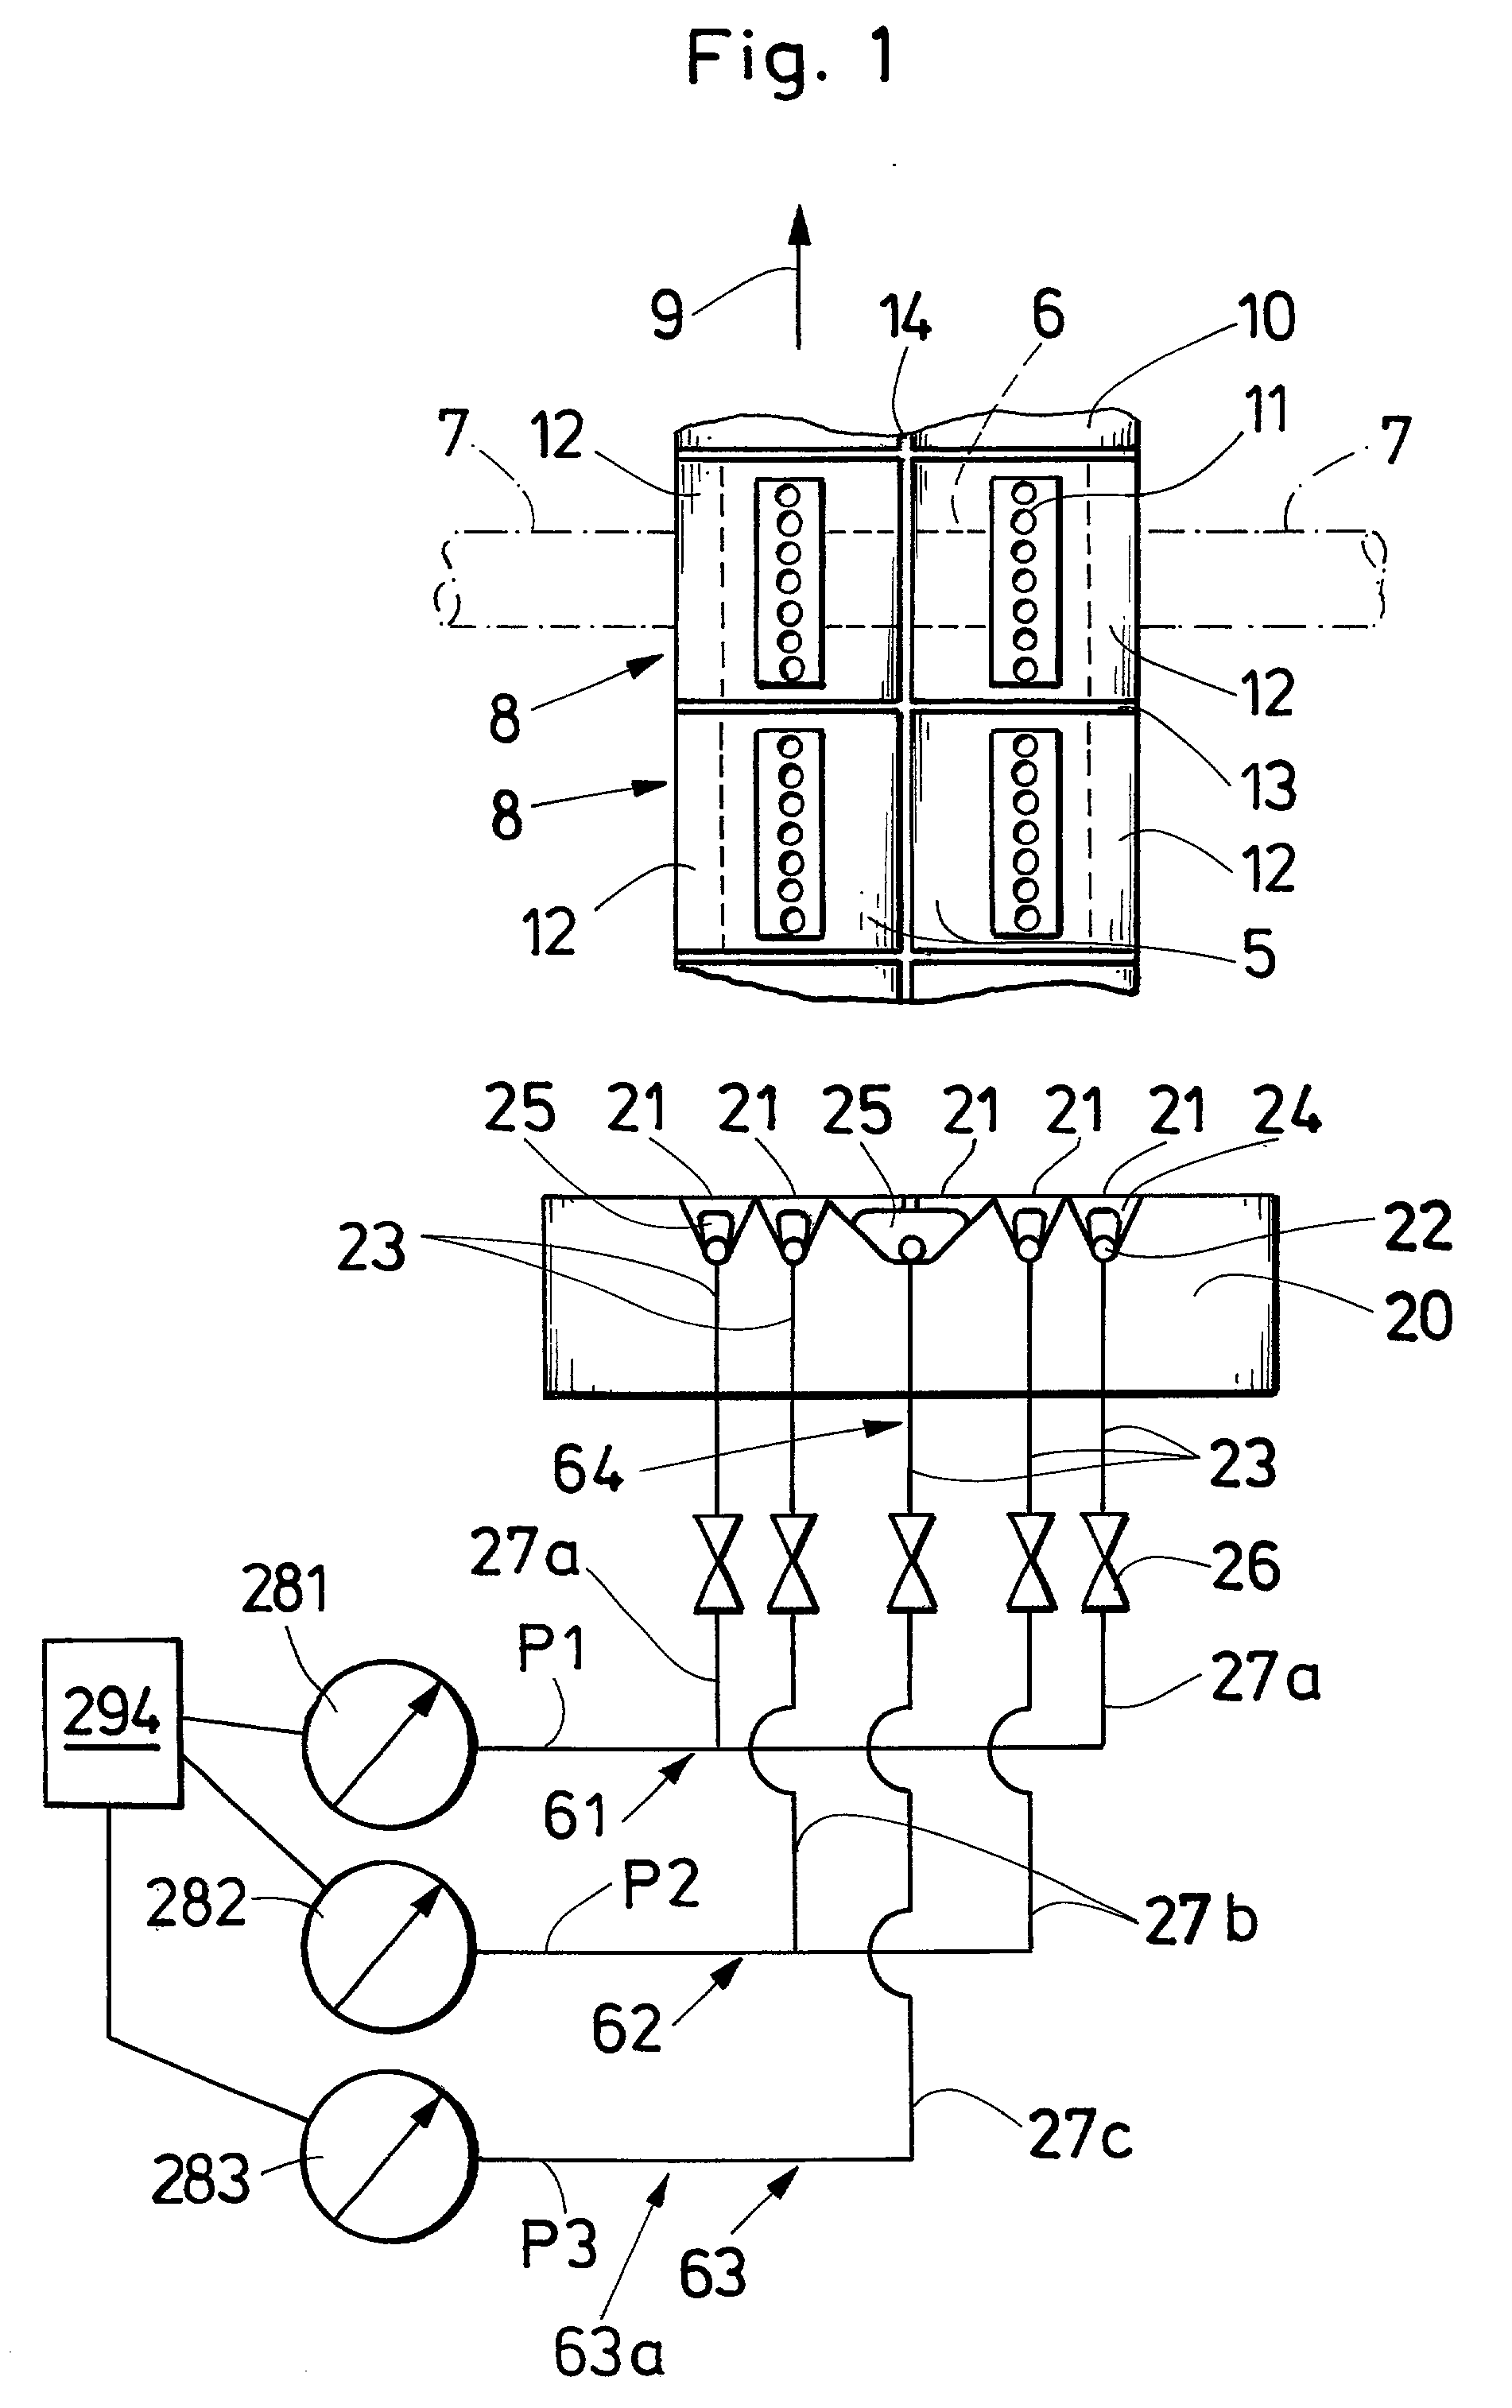 Method of and apparatus for applying adhesive to webs of wrapping material